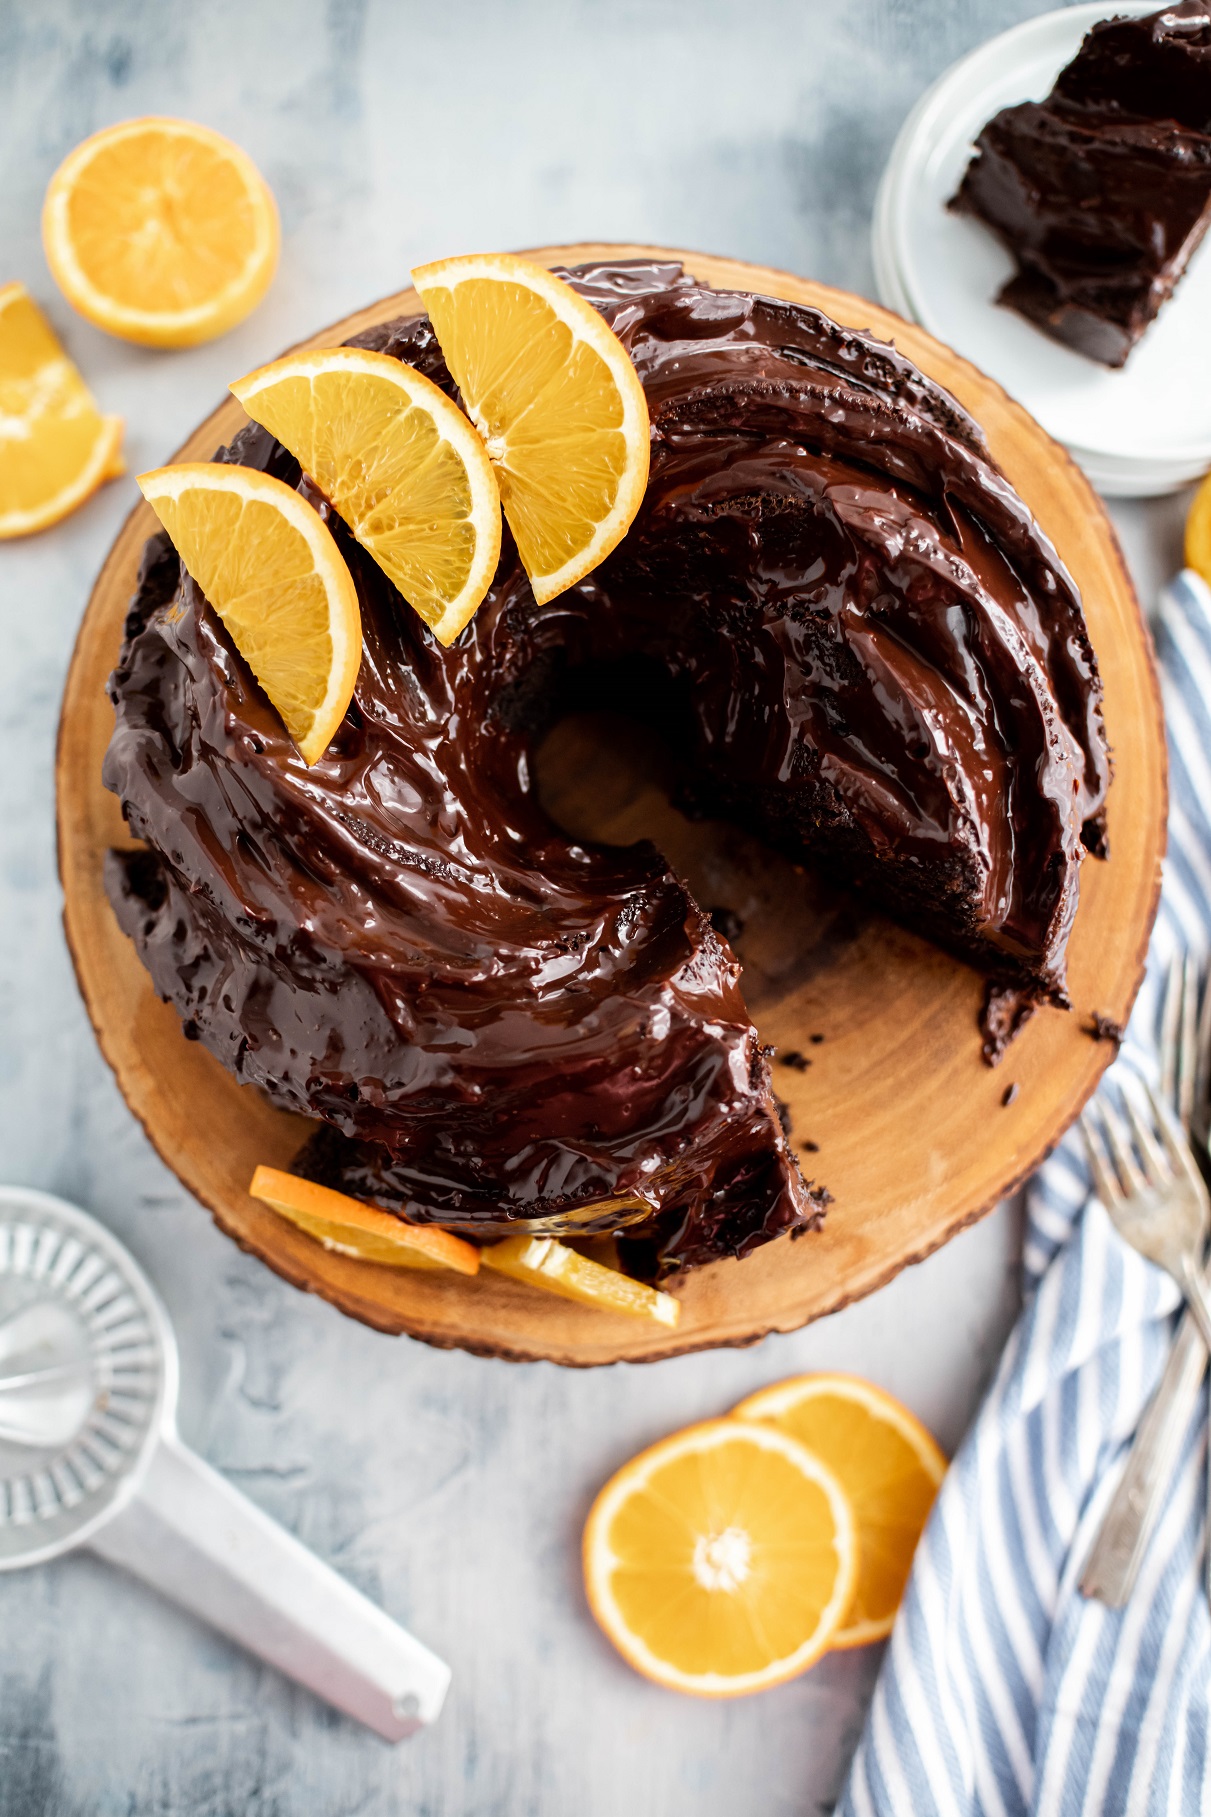 Orange Chocolate Bundt Cake on a wooden cake stand with a slice cut out and on a plate in the background.